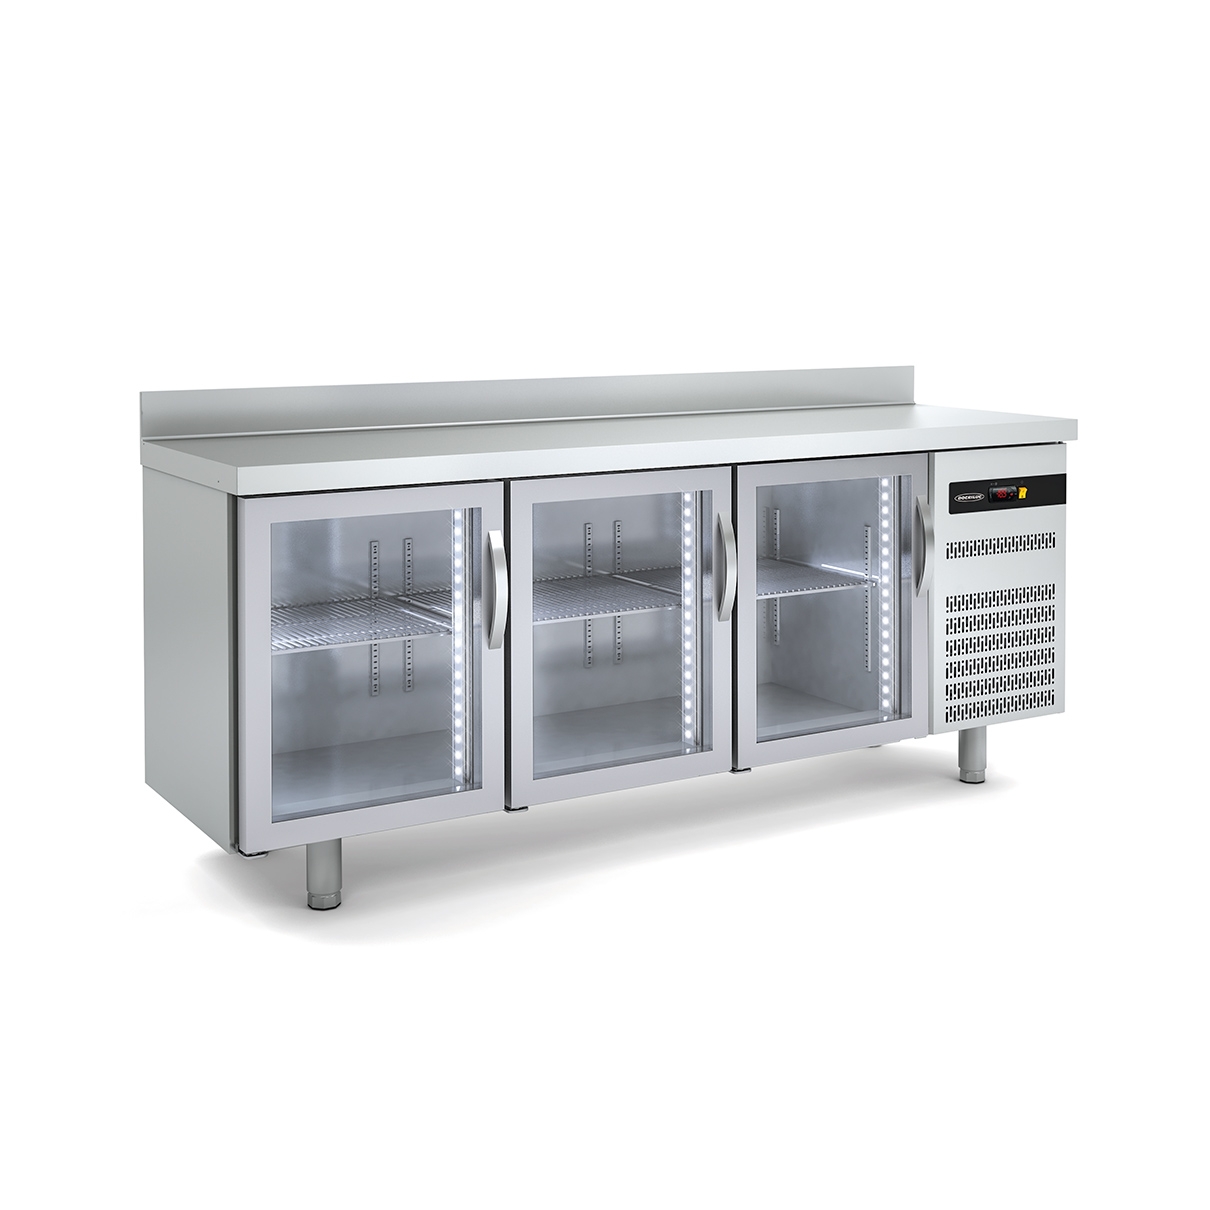 SNACK Refrigerated Table MVD